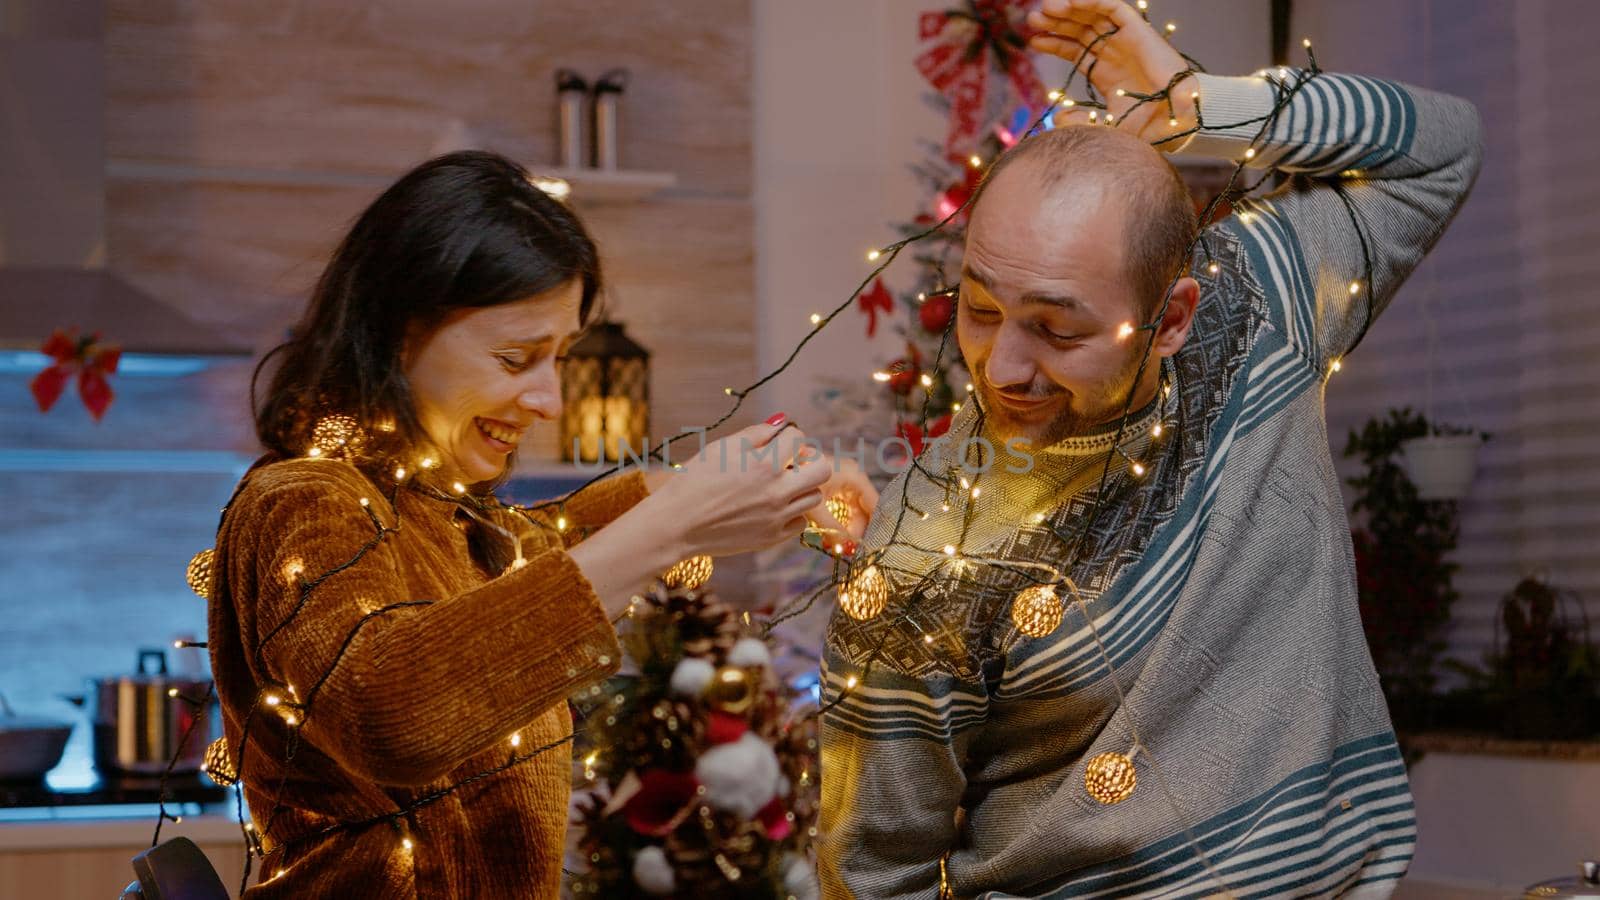 Couple laughing getting tangled in string of festive lights while decorating kitchen for christmas eve celebration. People knotted in garland of illuminated bulbs and twinkle lights